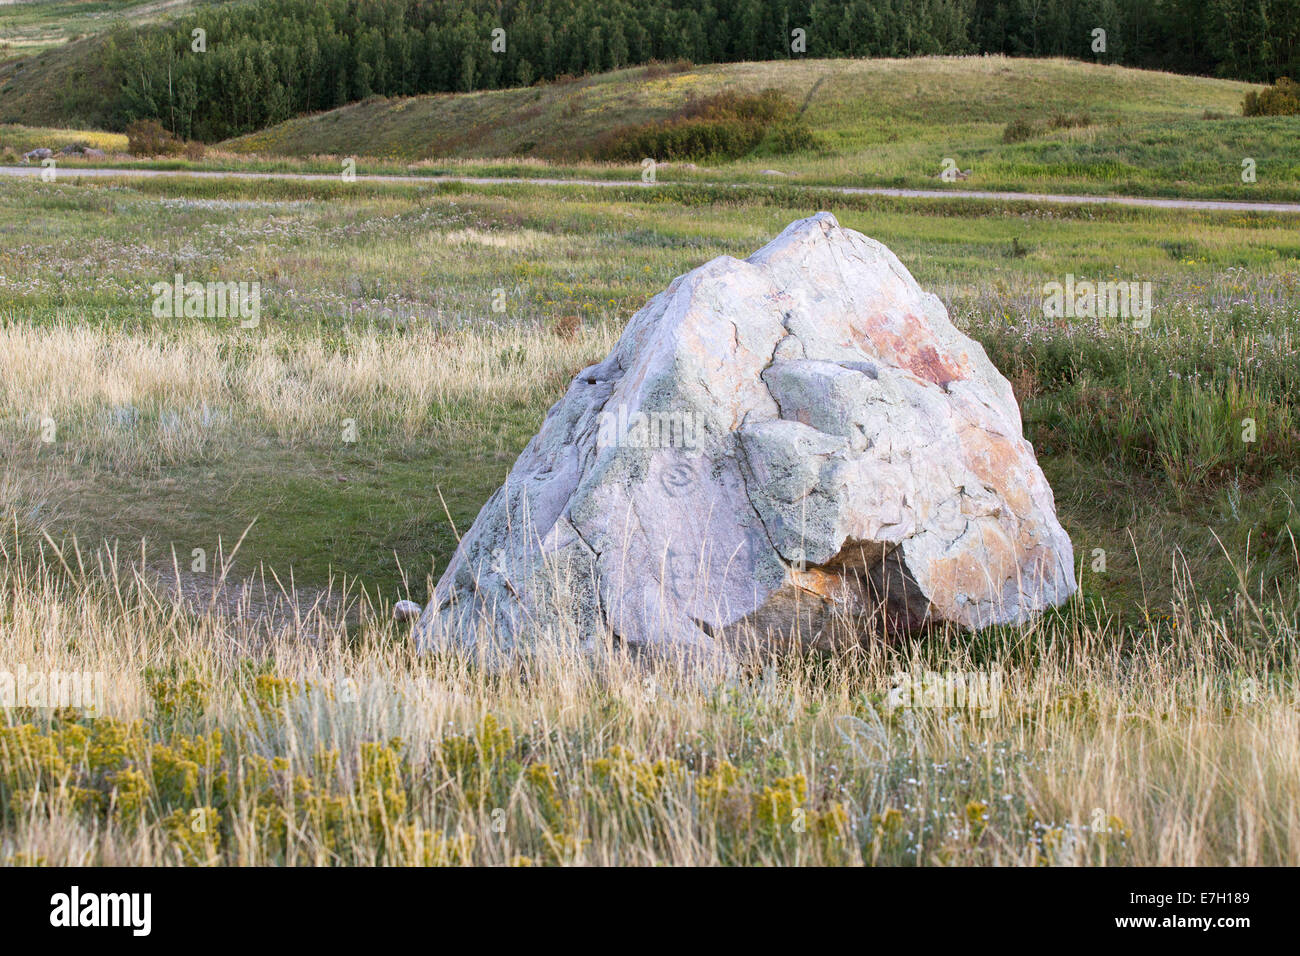 Quartzite glacial erratic transported by glacier ice in cold climatic conditions during the Pleistocene Ice Age, later used as a bison rubbing stone Stock Photo